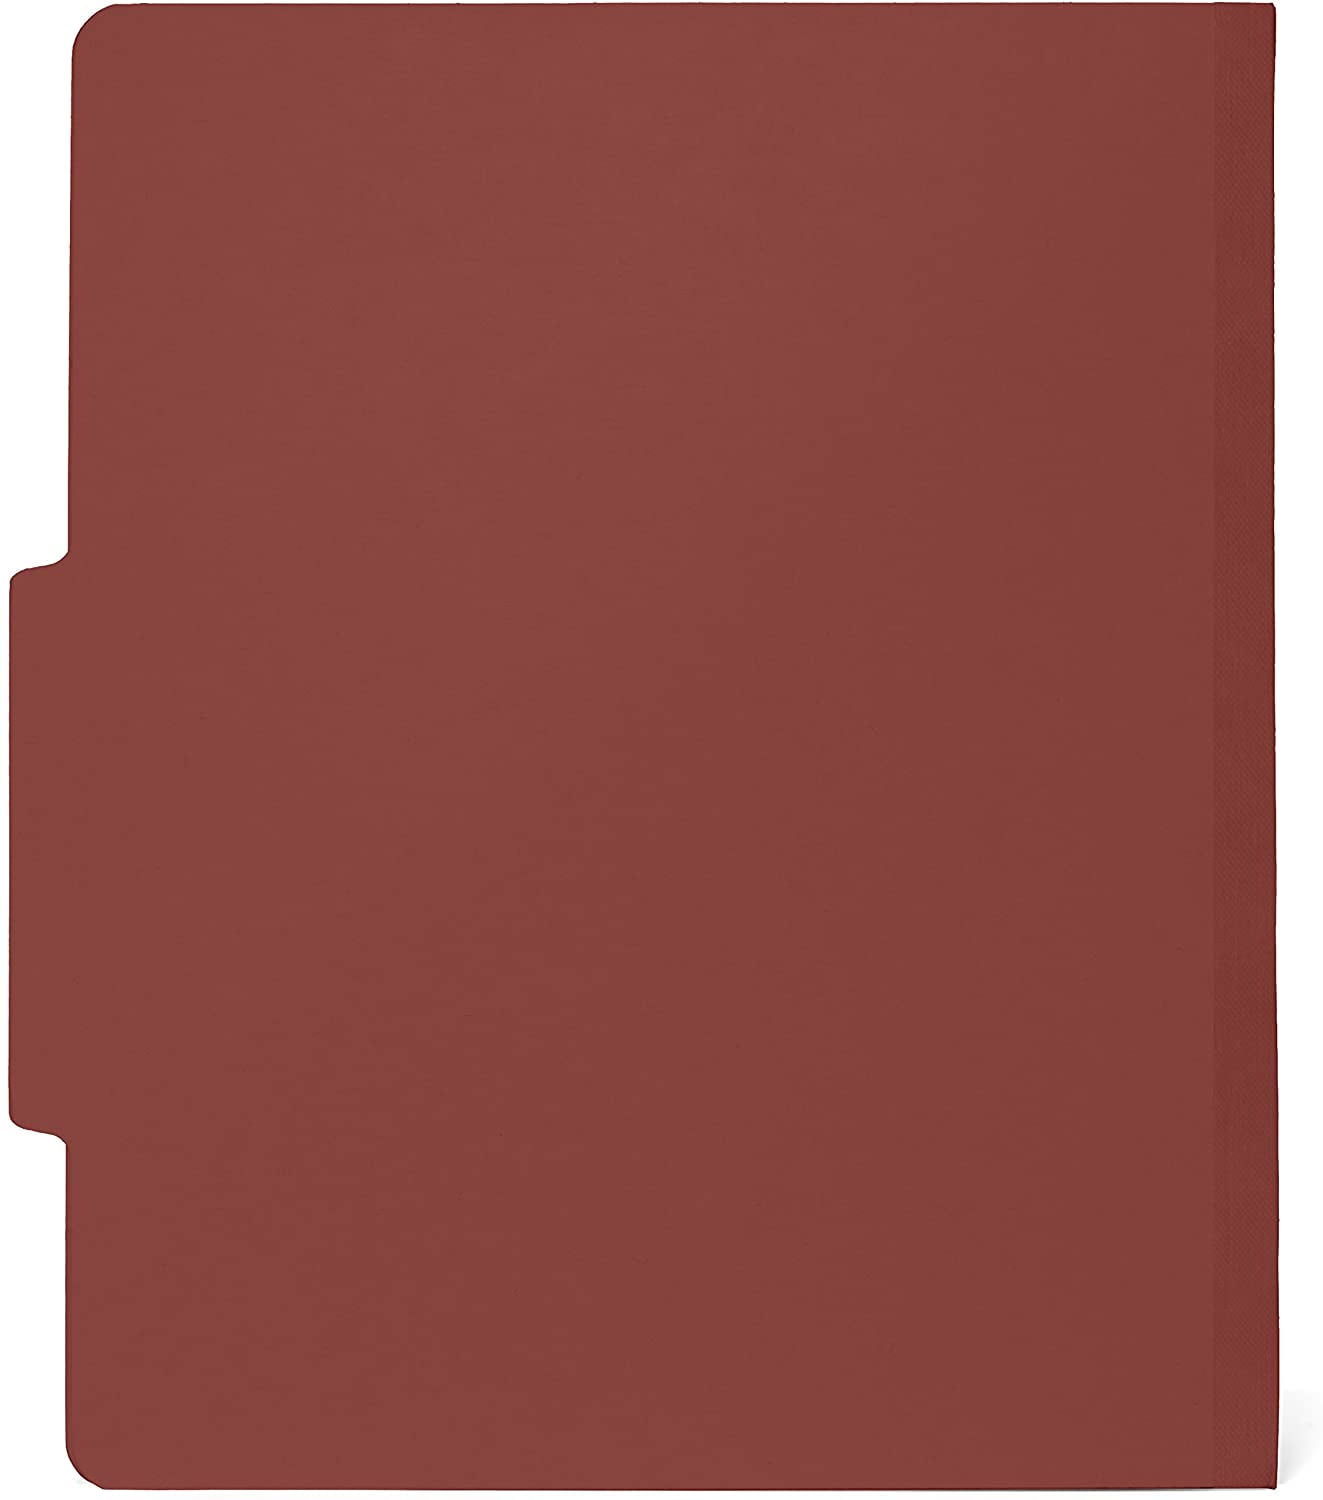 10 Folders 10 Legal Size Classification Folders- 2 Divider-2?? Tyvek expansions- Durable 2 Prongs Designed to Organize Standard Law Client Files Red Office Reports- Legal Size 